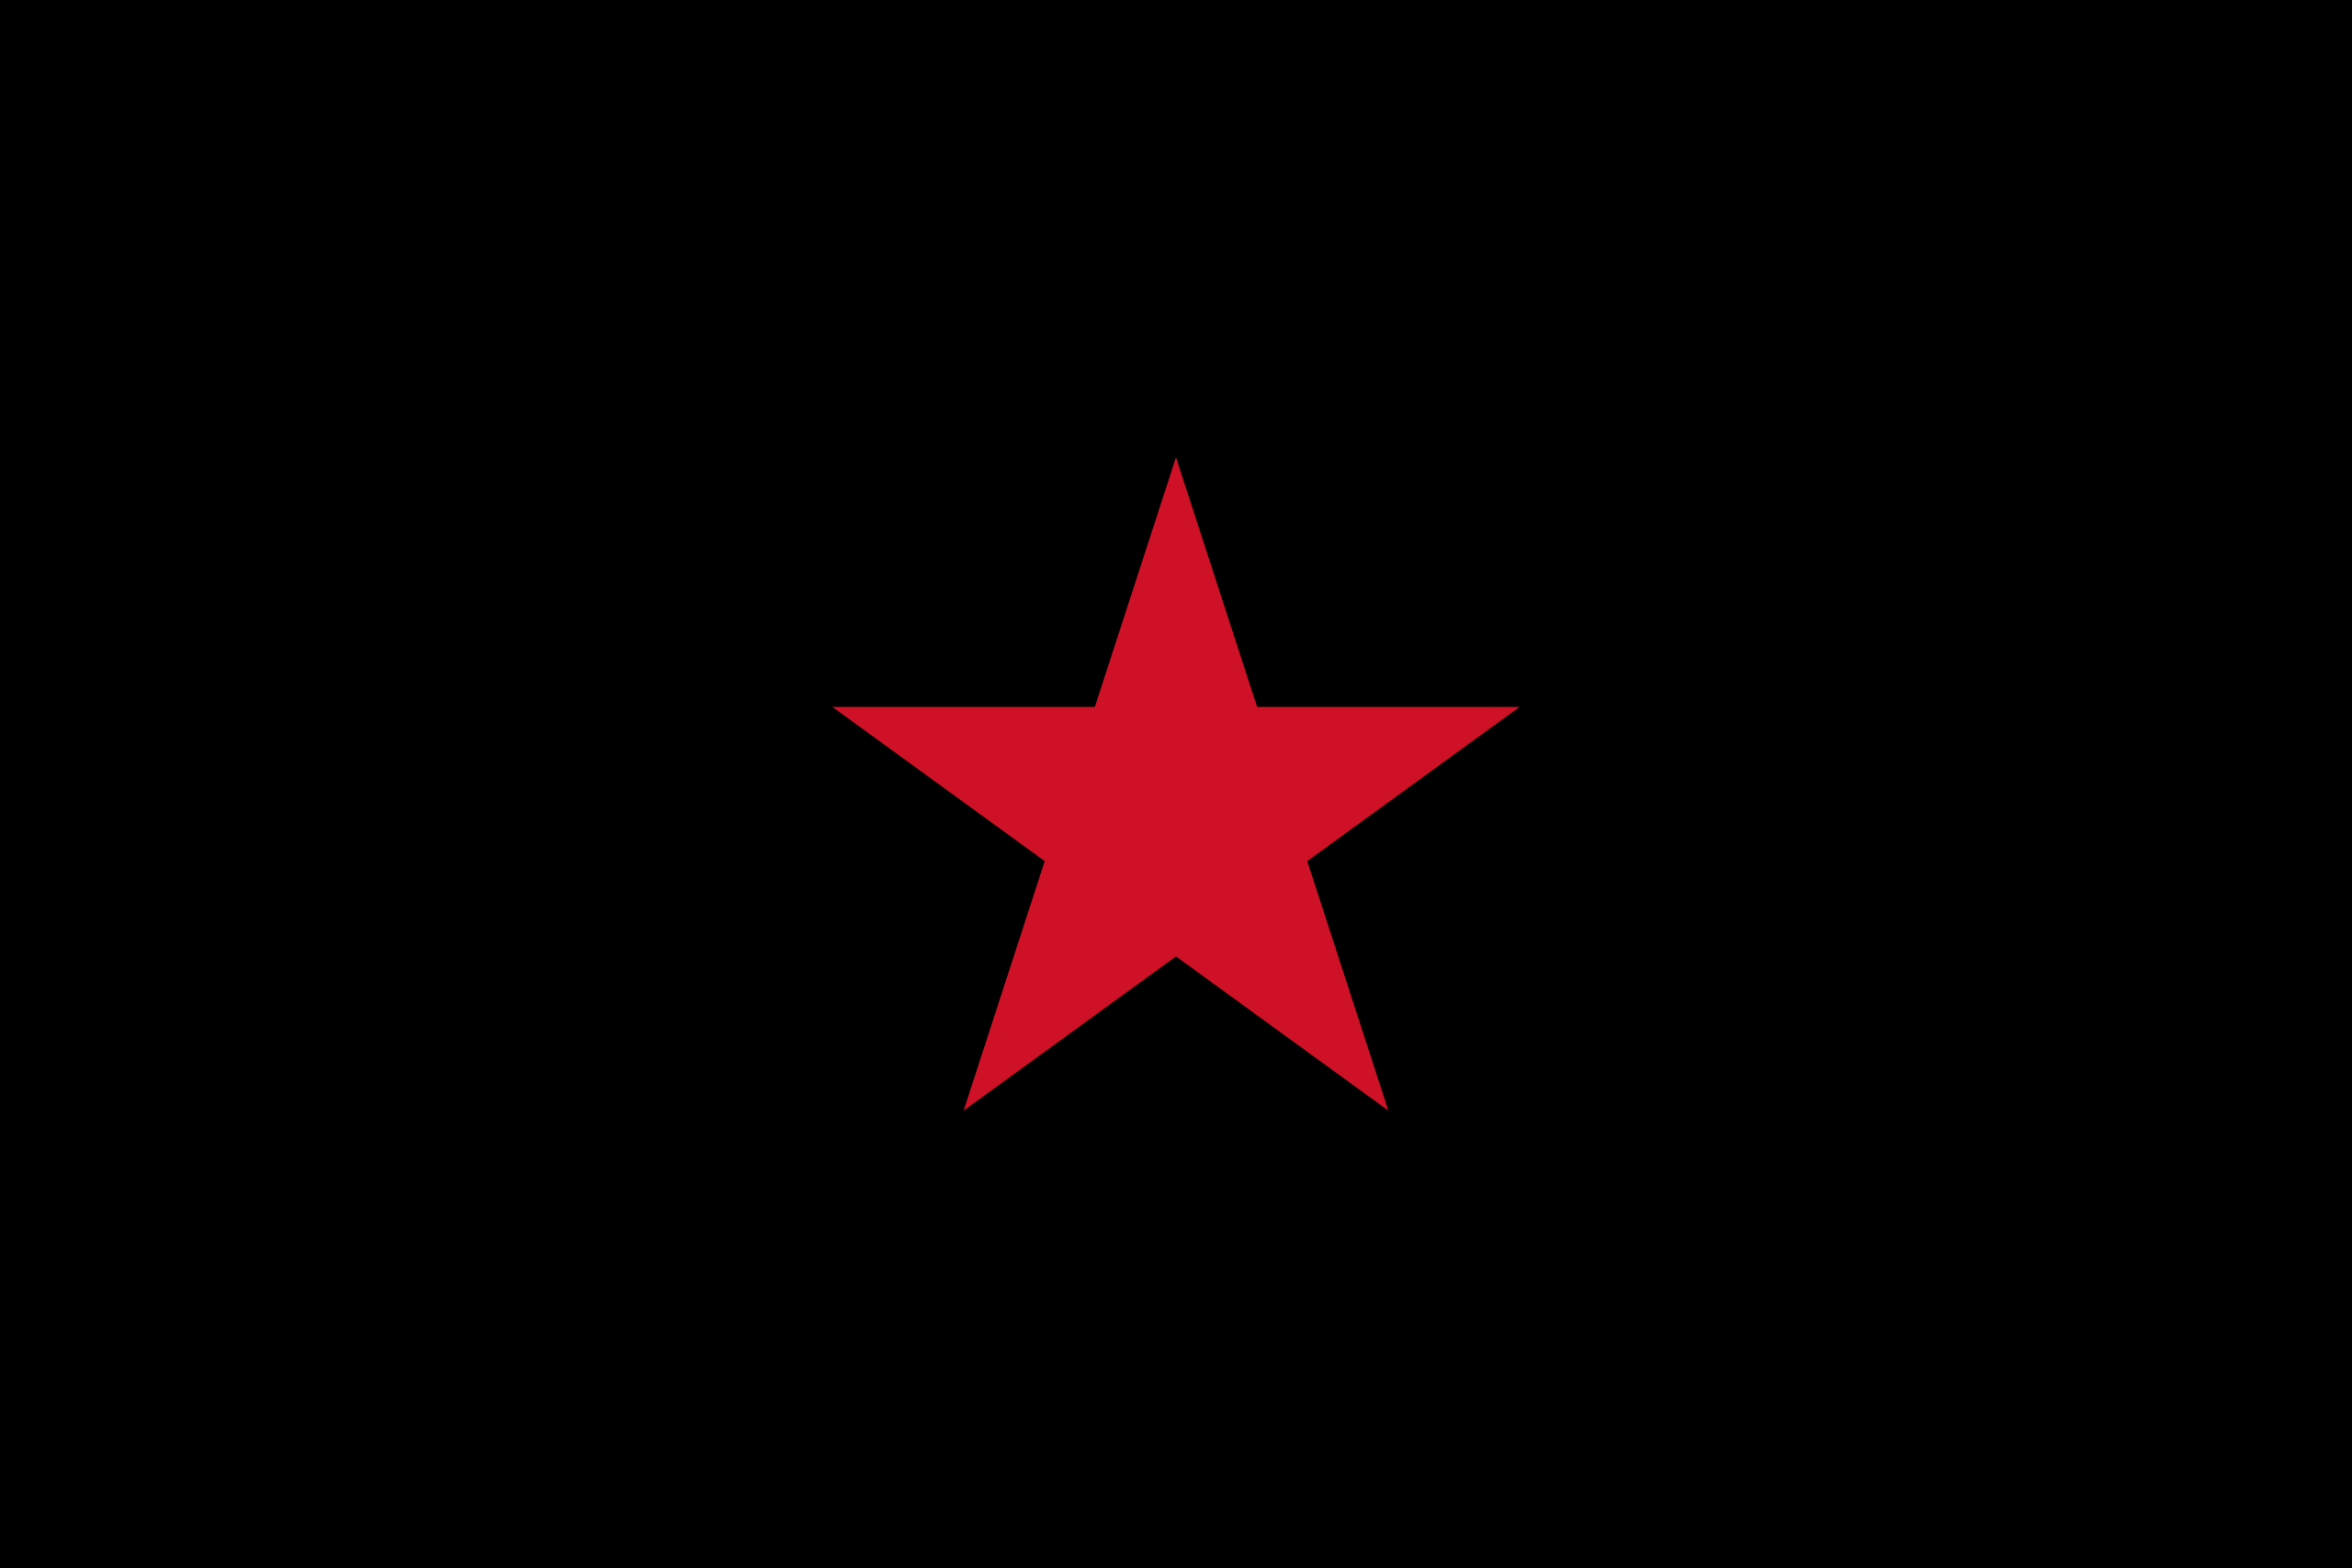 File:Zapatista flag.png